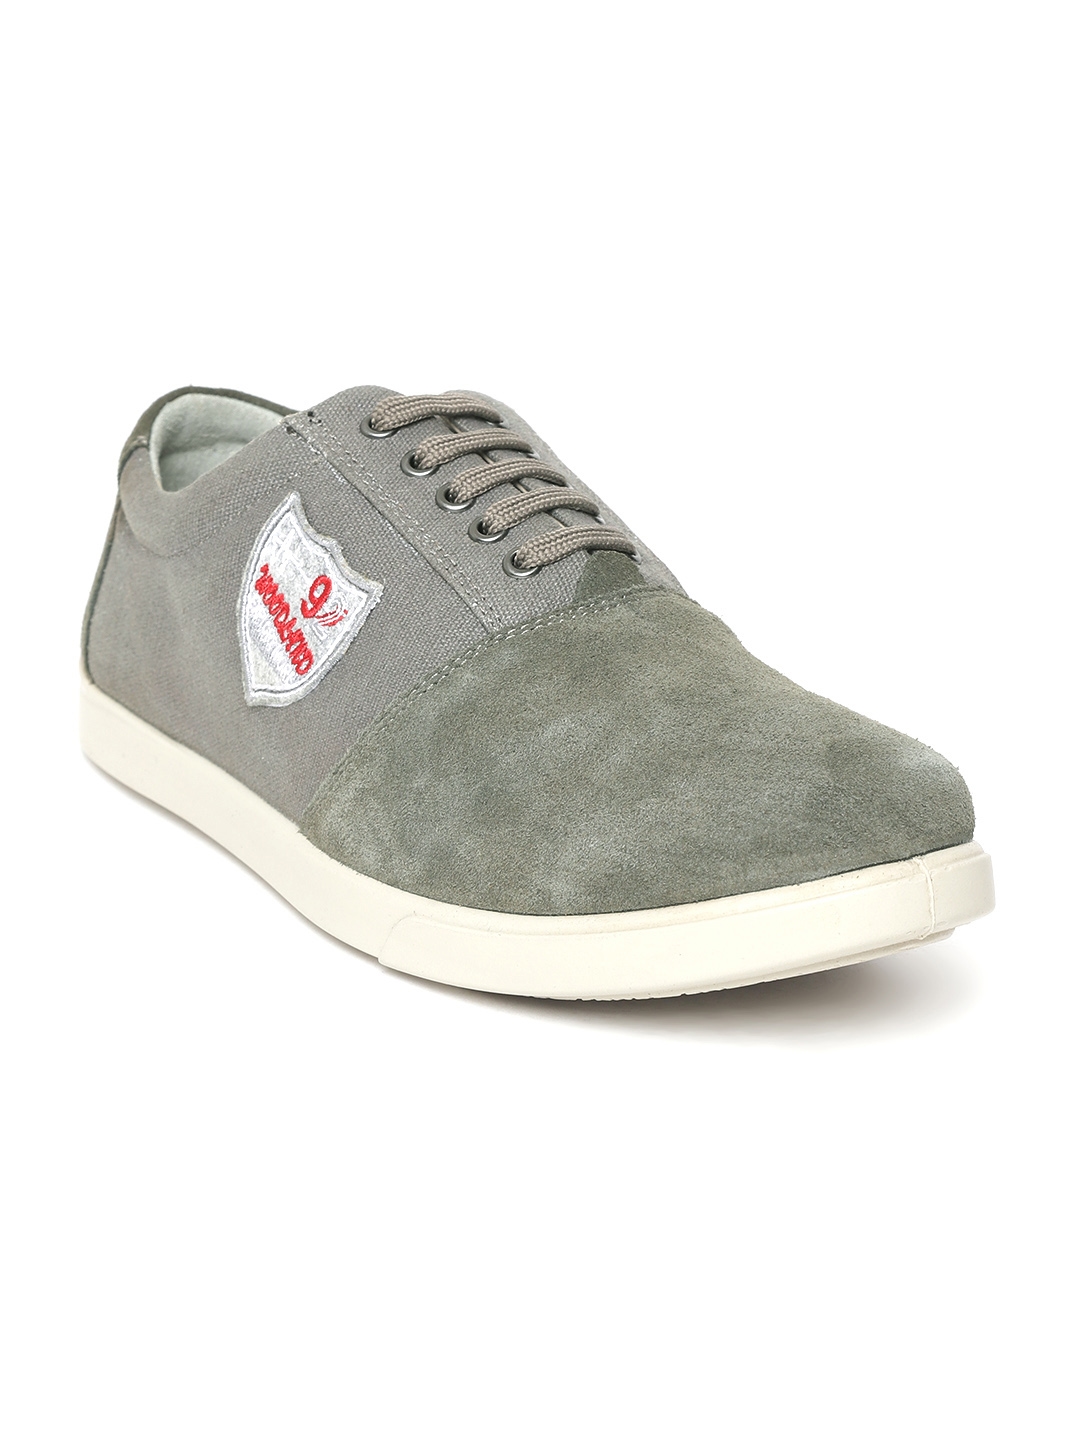 woodland grey casual shoes